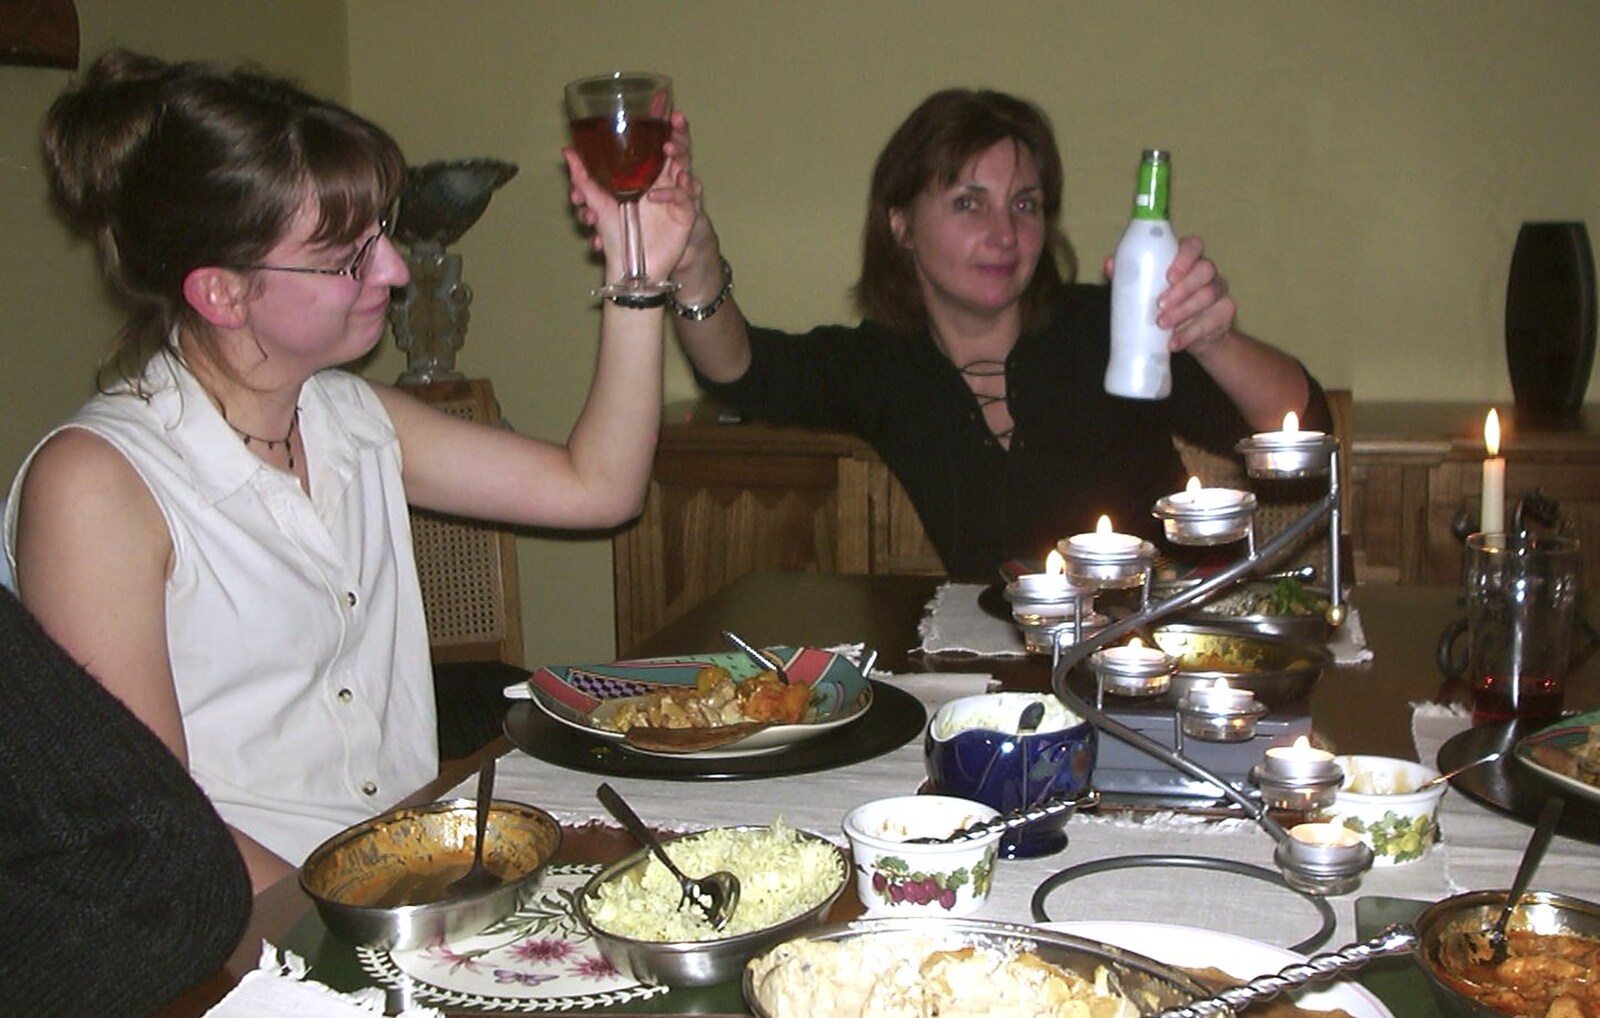 Anne holds up a Smirnoff Ice and Suey's wine from Anne's Curry Night, Thorndon, Suffolk - 13th January 2003